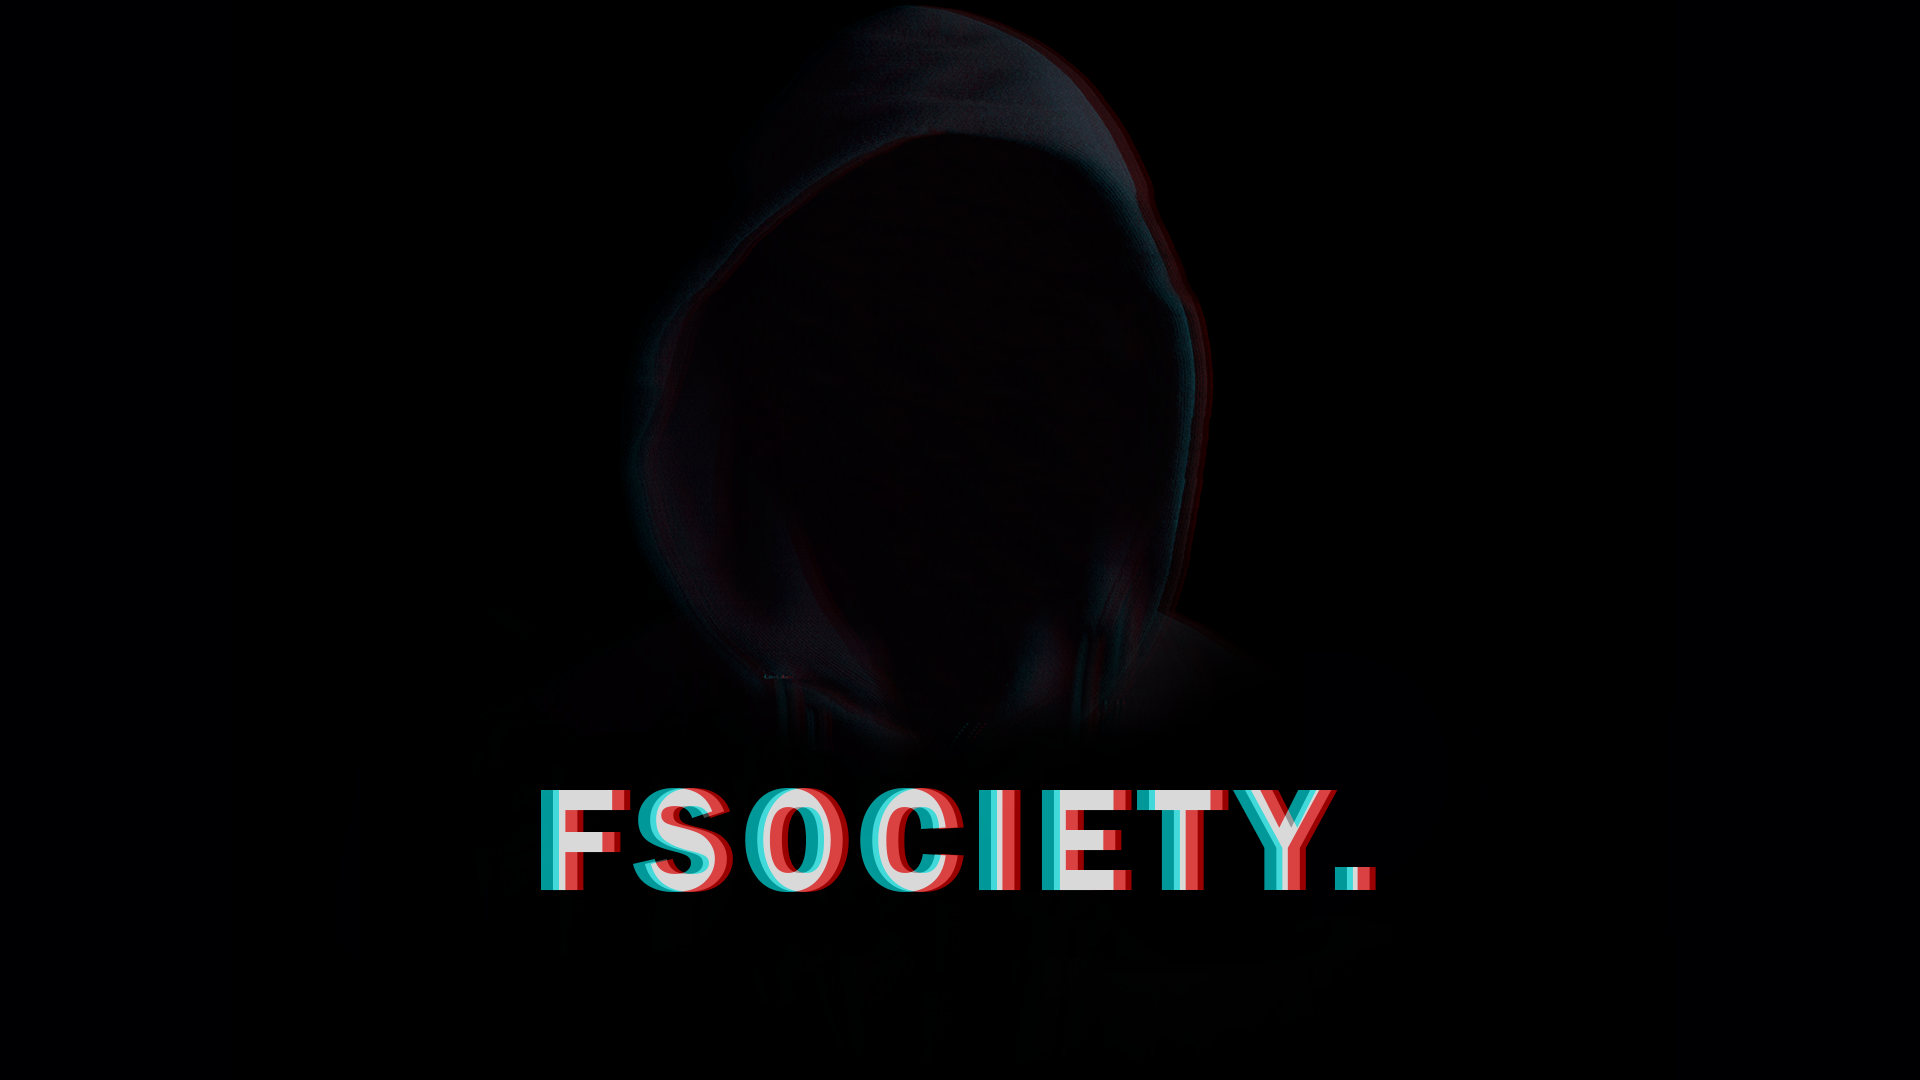 The Anonymous Fsociety Wallpaper iPhone